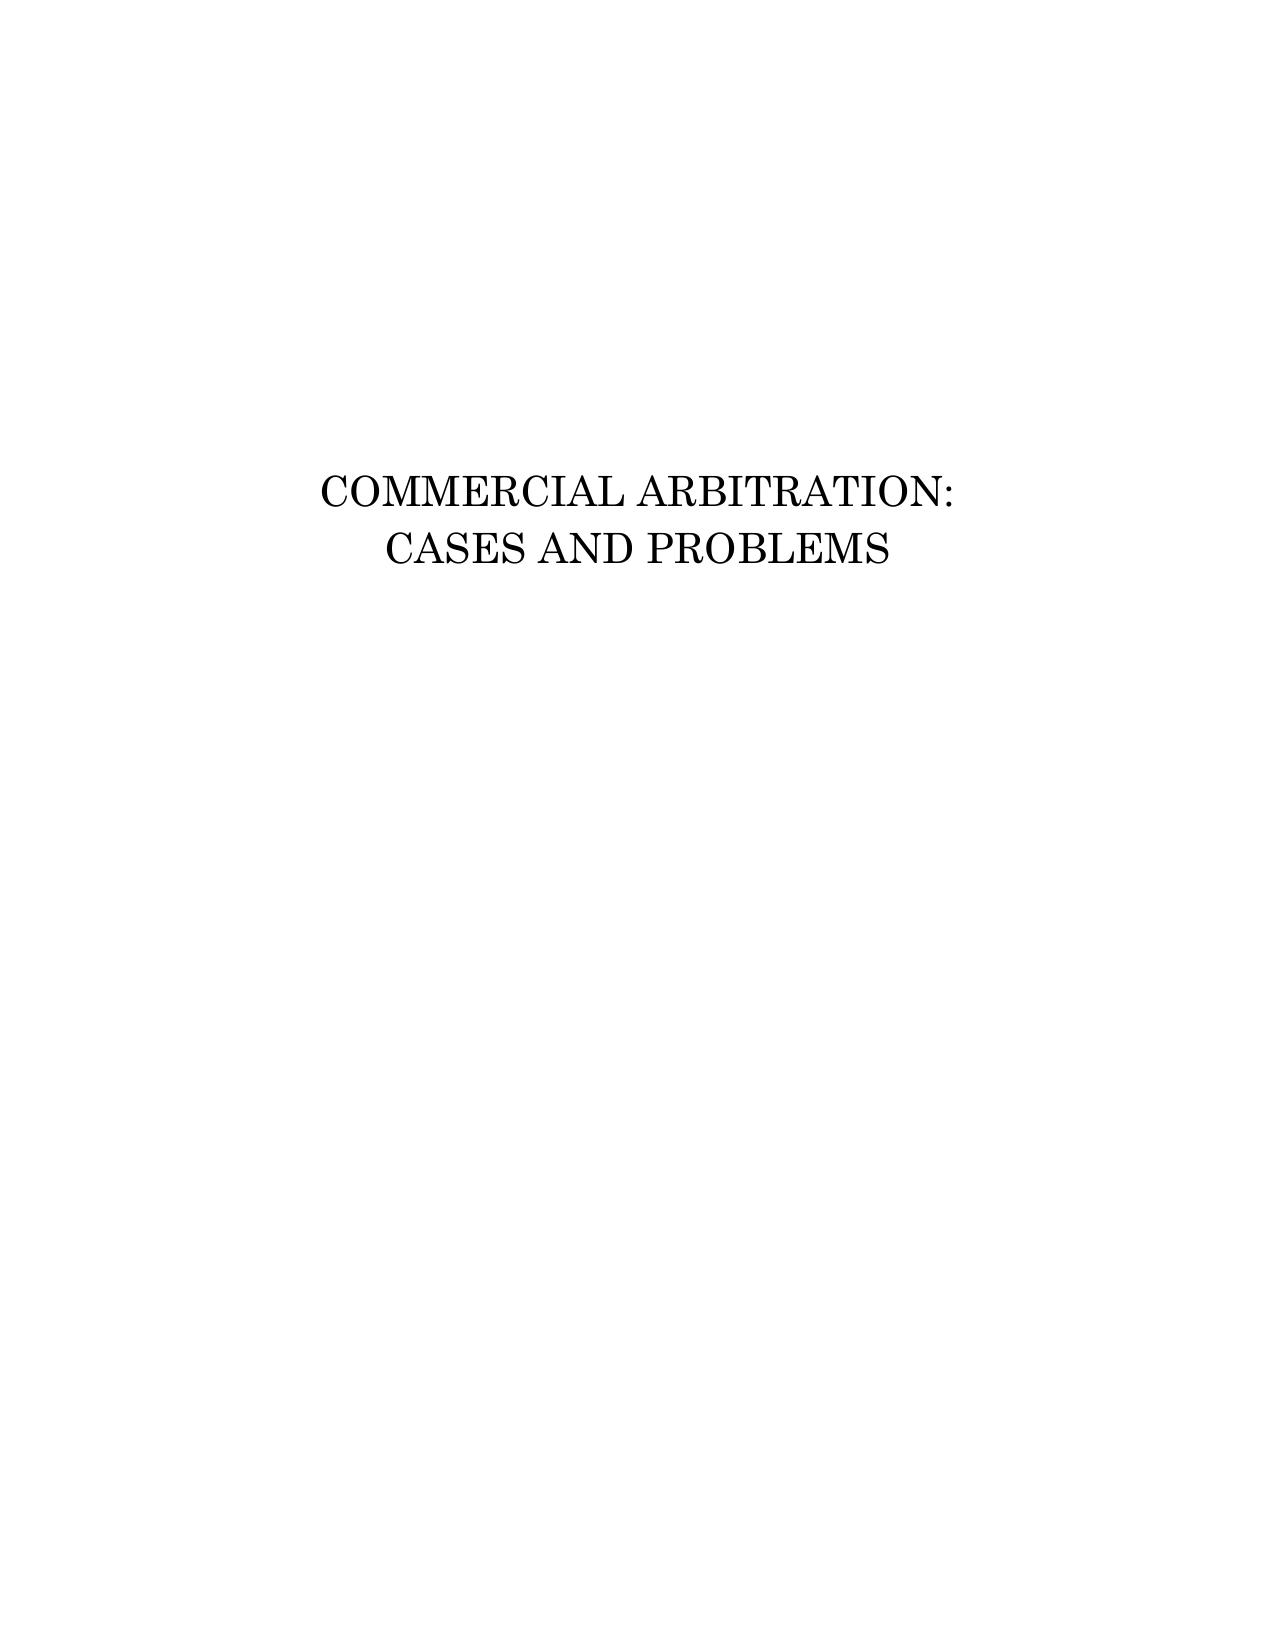 Commercial Arbitration Cases and Problems 2015